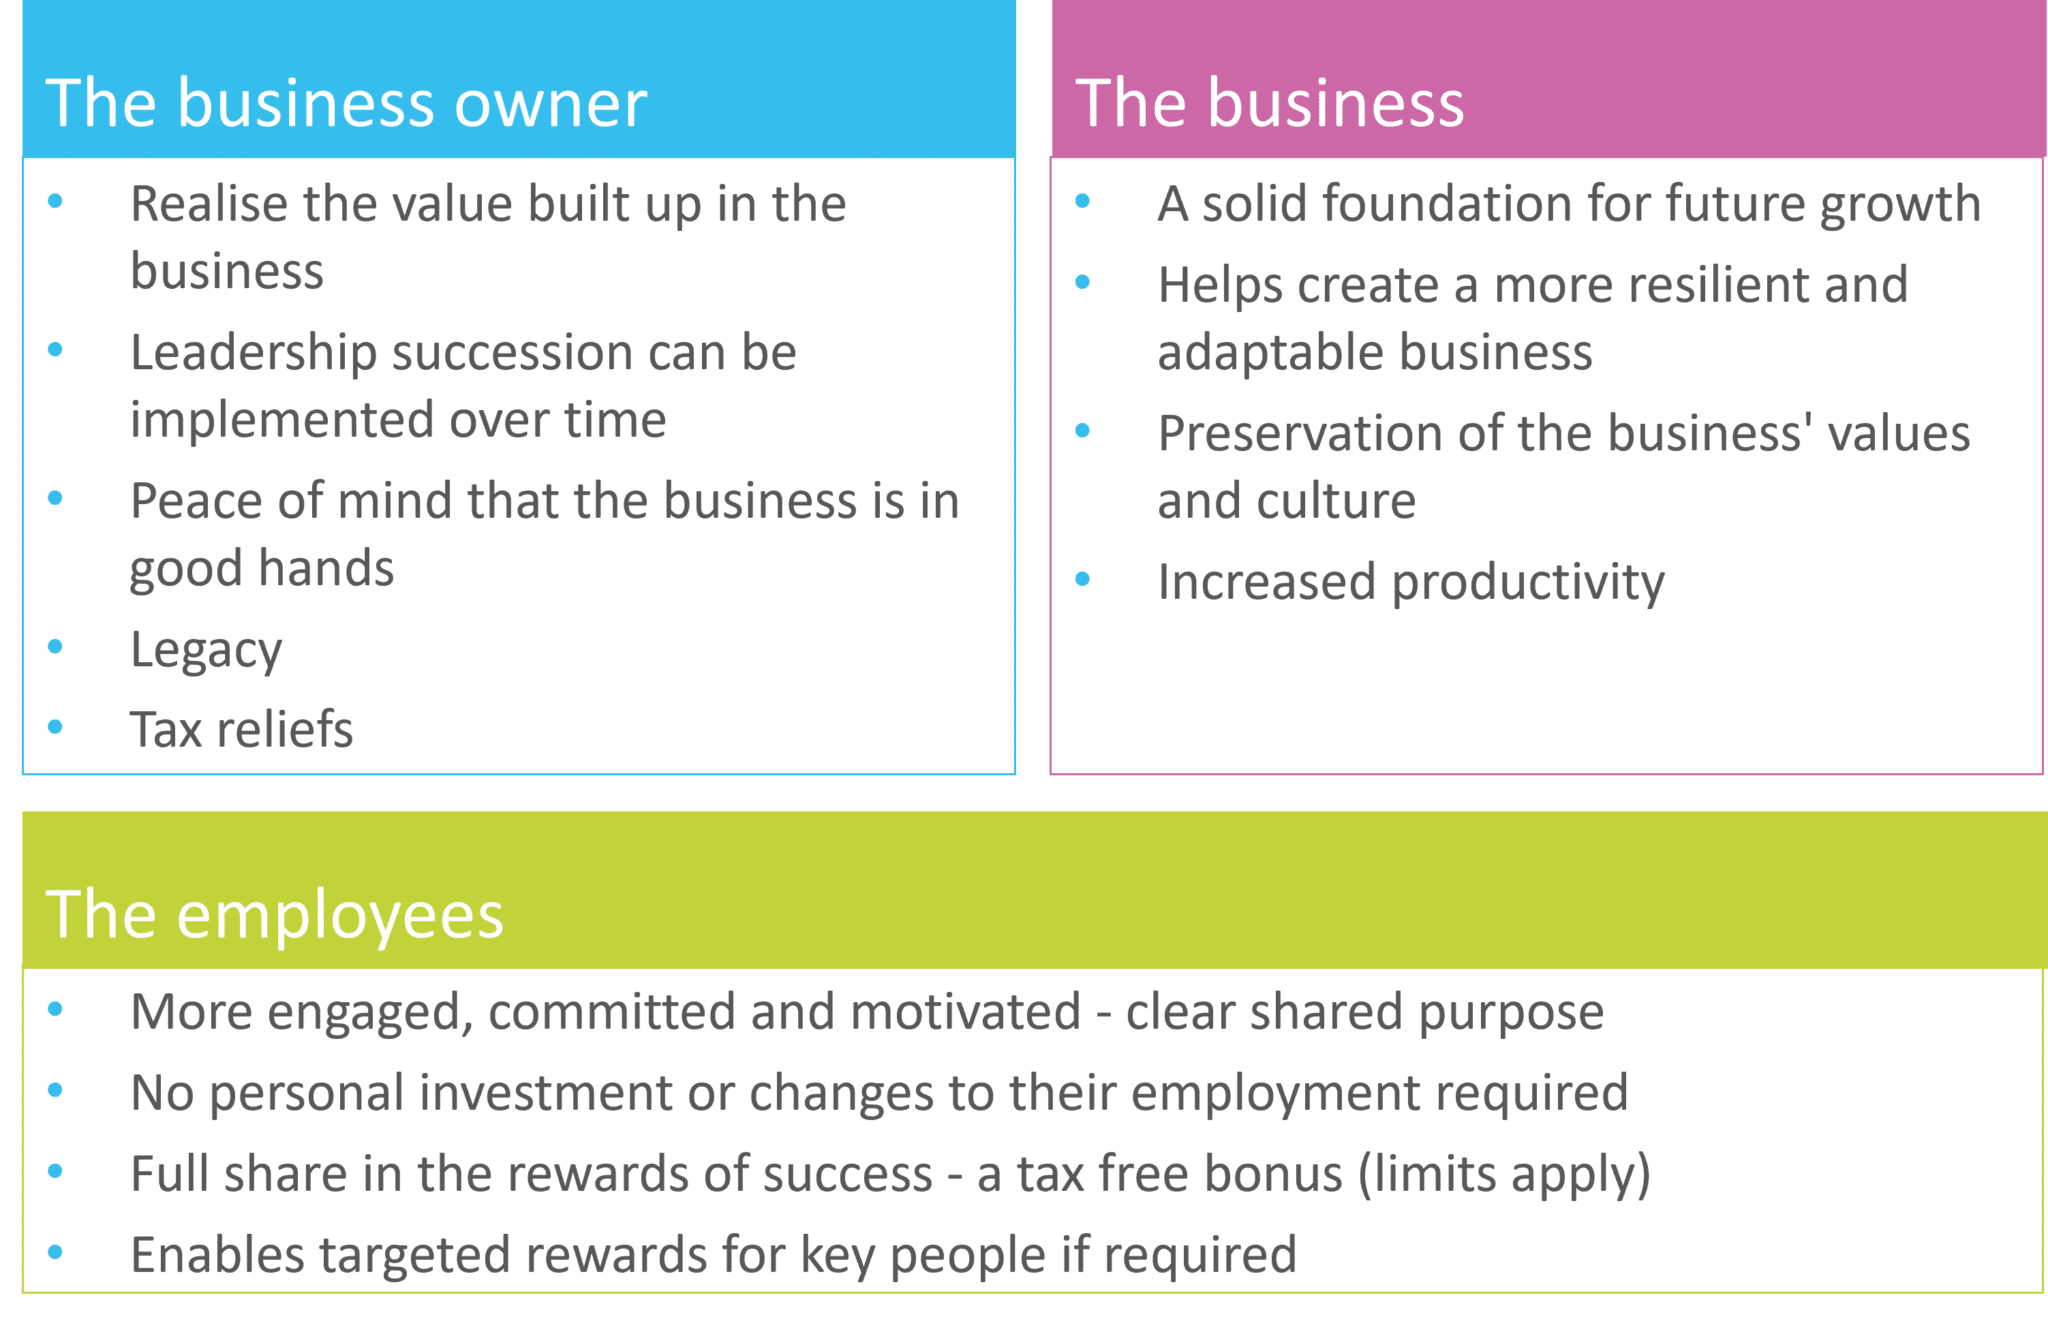 The benefits of an EOT to the business owner, the business and the employees.